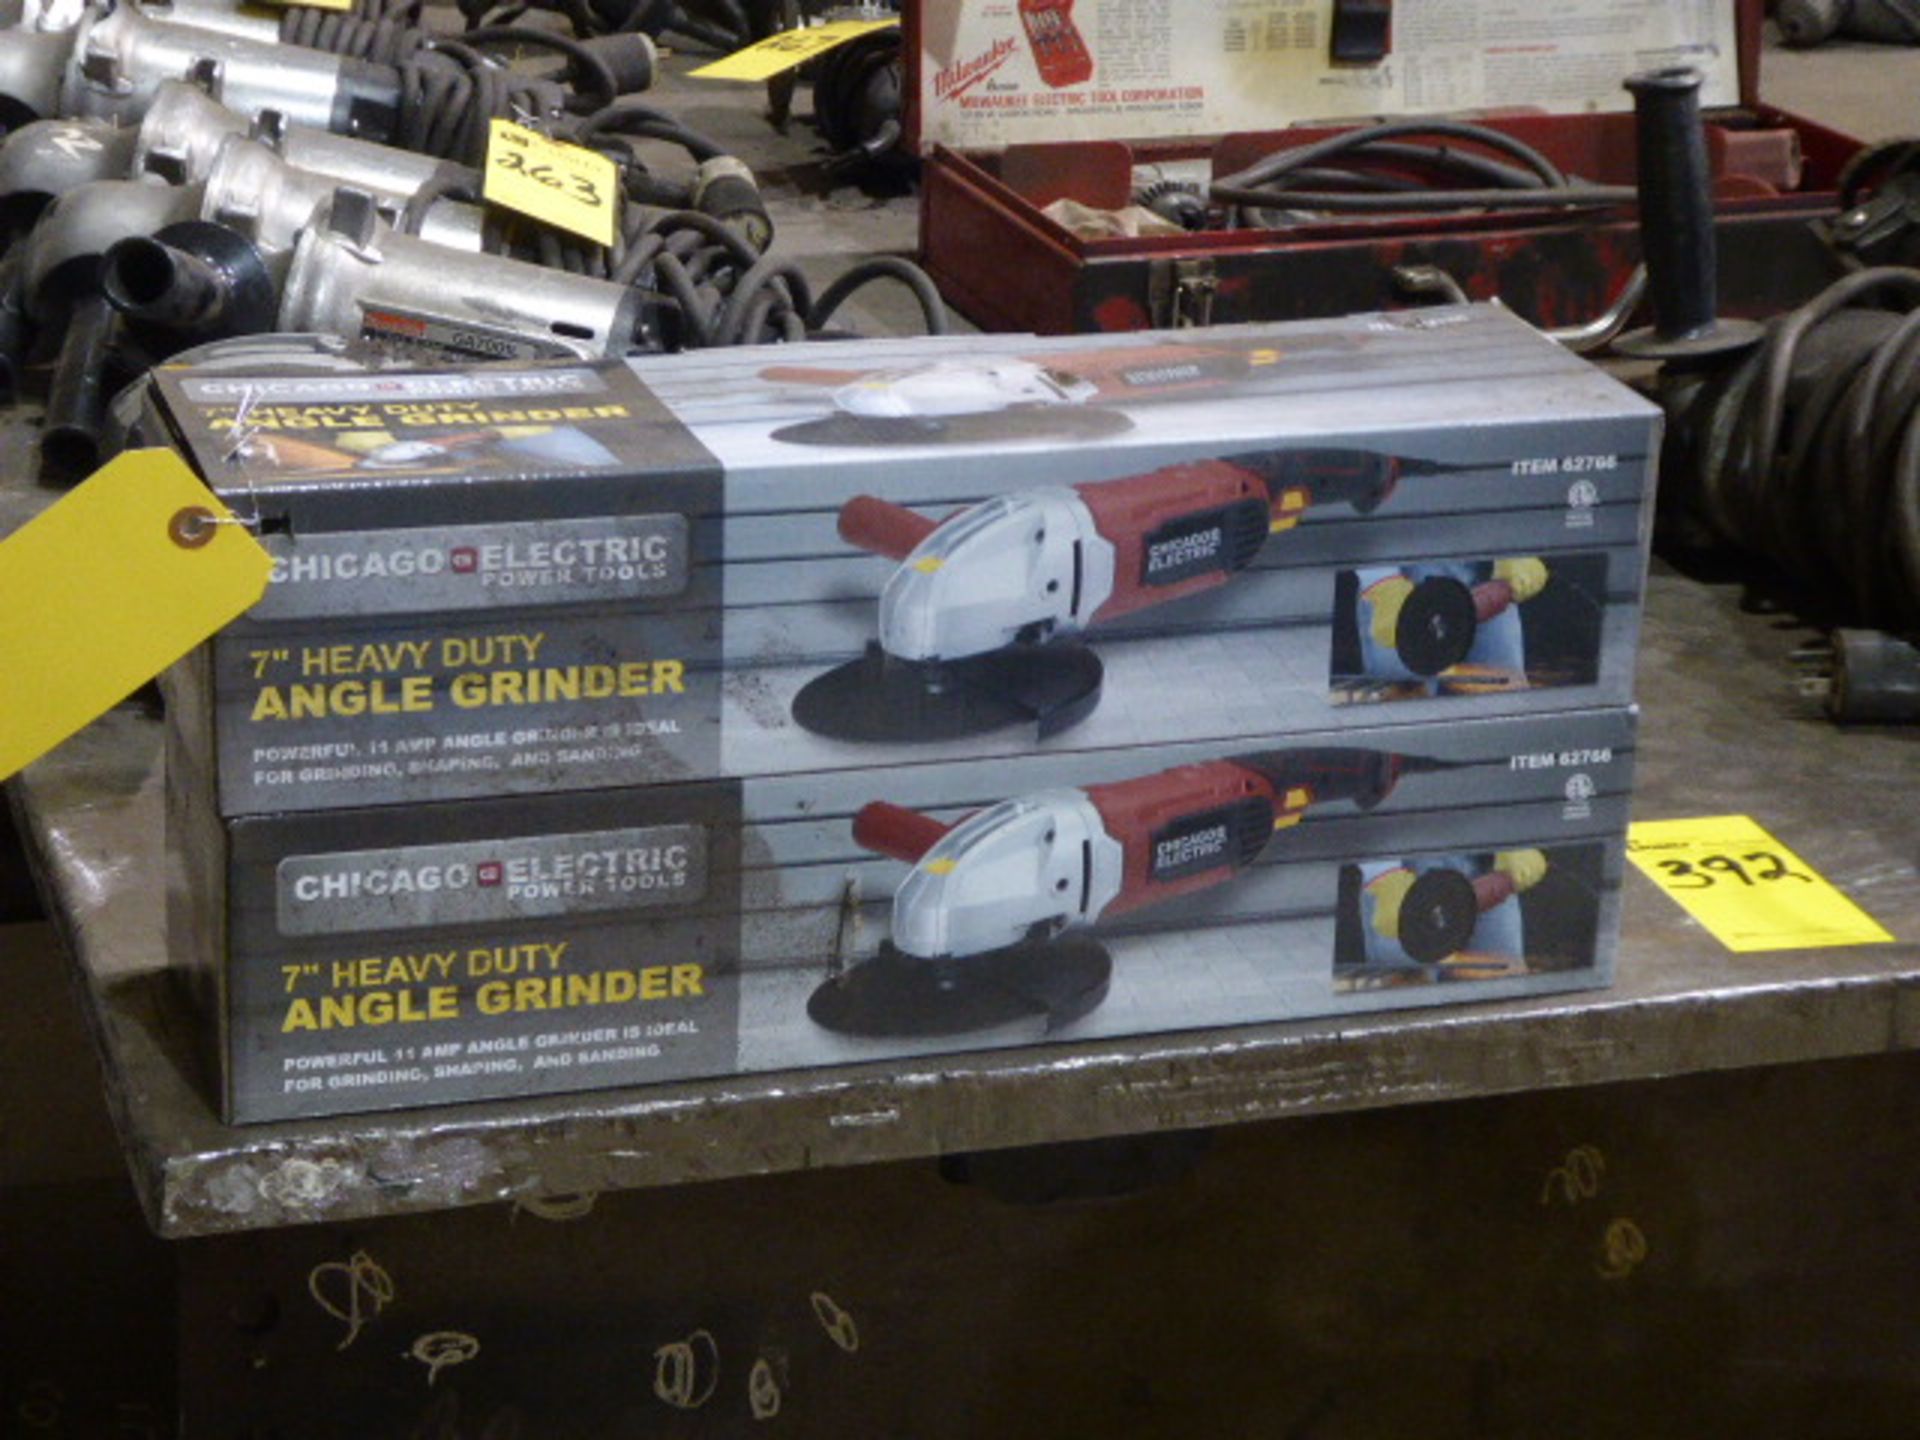 Chicago Electric 7" Angle Grinder (2 Each)